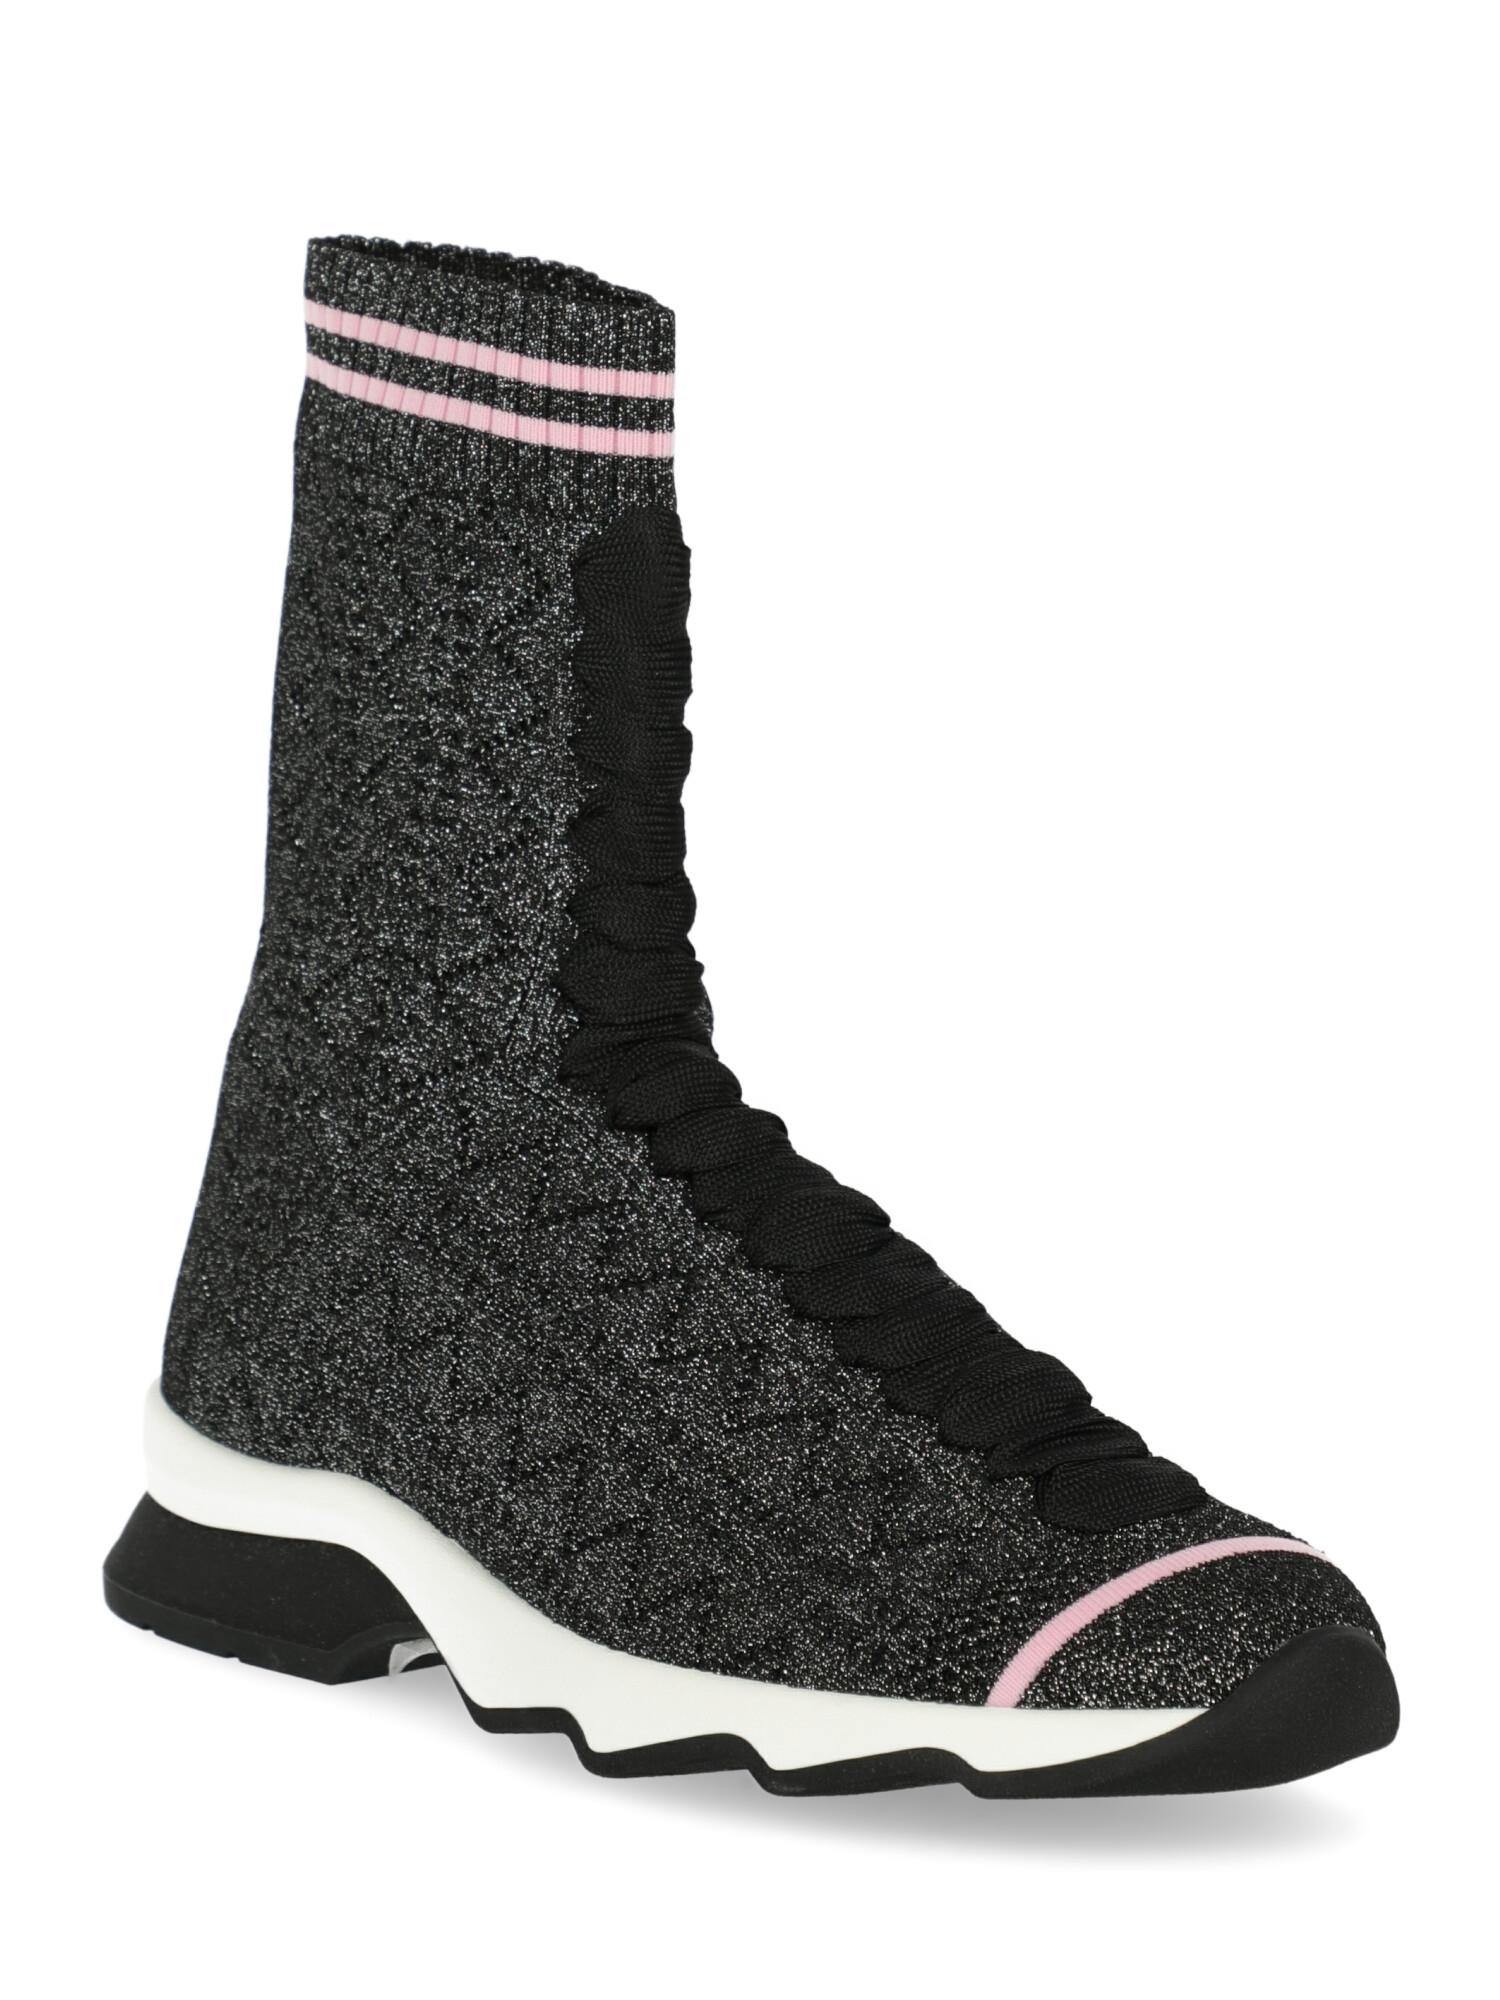 Shoe, fabric, solid color, metallic effect, sock sneakers, knitted, no fastening, contrasting applications

Includes:
- Dust bag
- Box

Product Condition: New With Tag

Composition:
Upper: 100% Synthetic
Sole: 100% Rubber

Color: Black
Product ID: